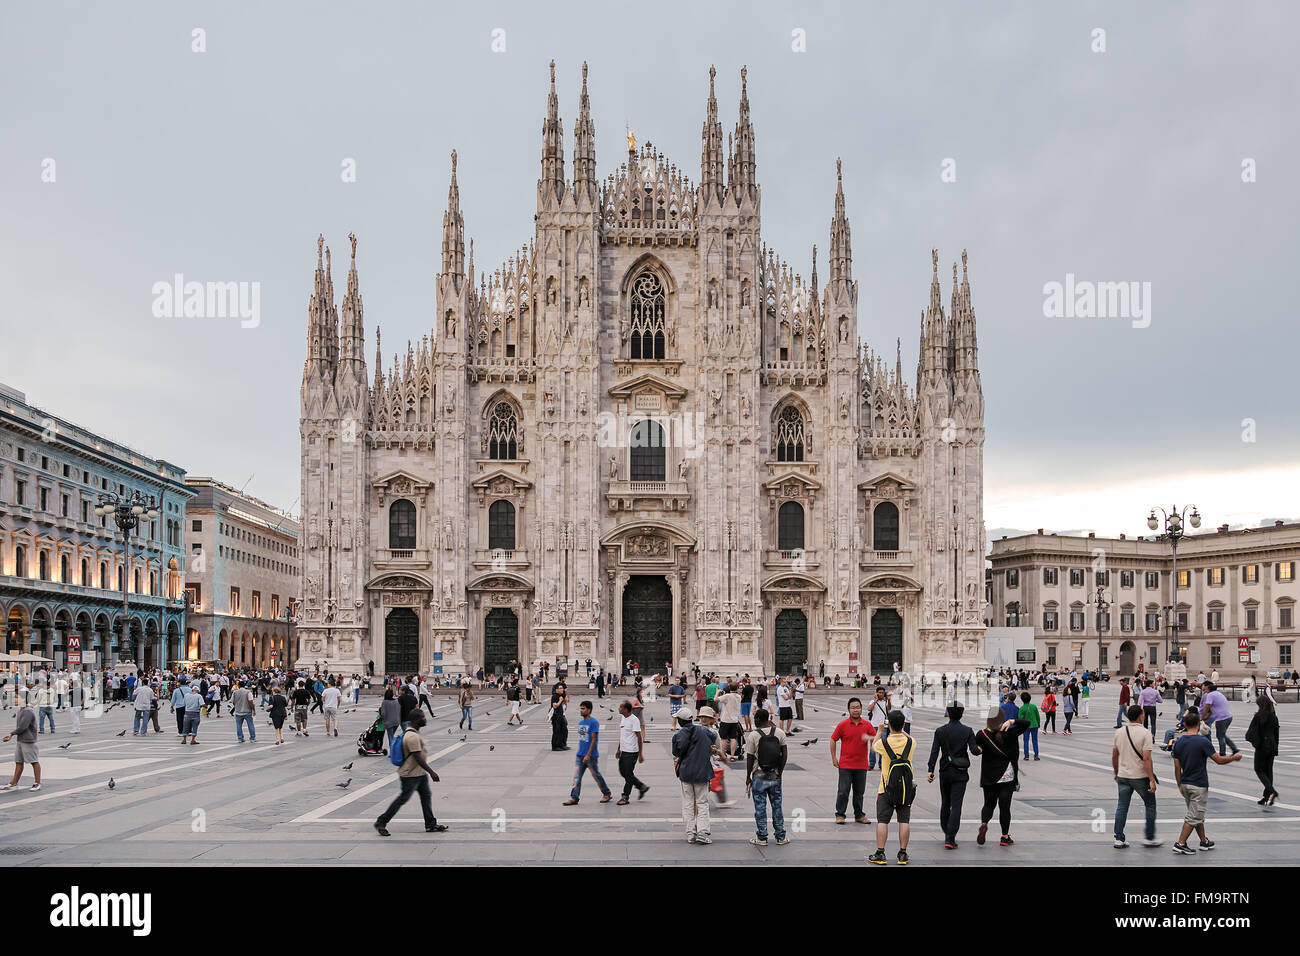 Milan, Italy - August 26, 2013: Piazza Duomo, a multitude of people animate the square in front of the main symbol of the city. Stock Photo